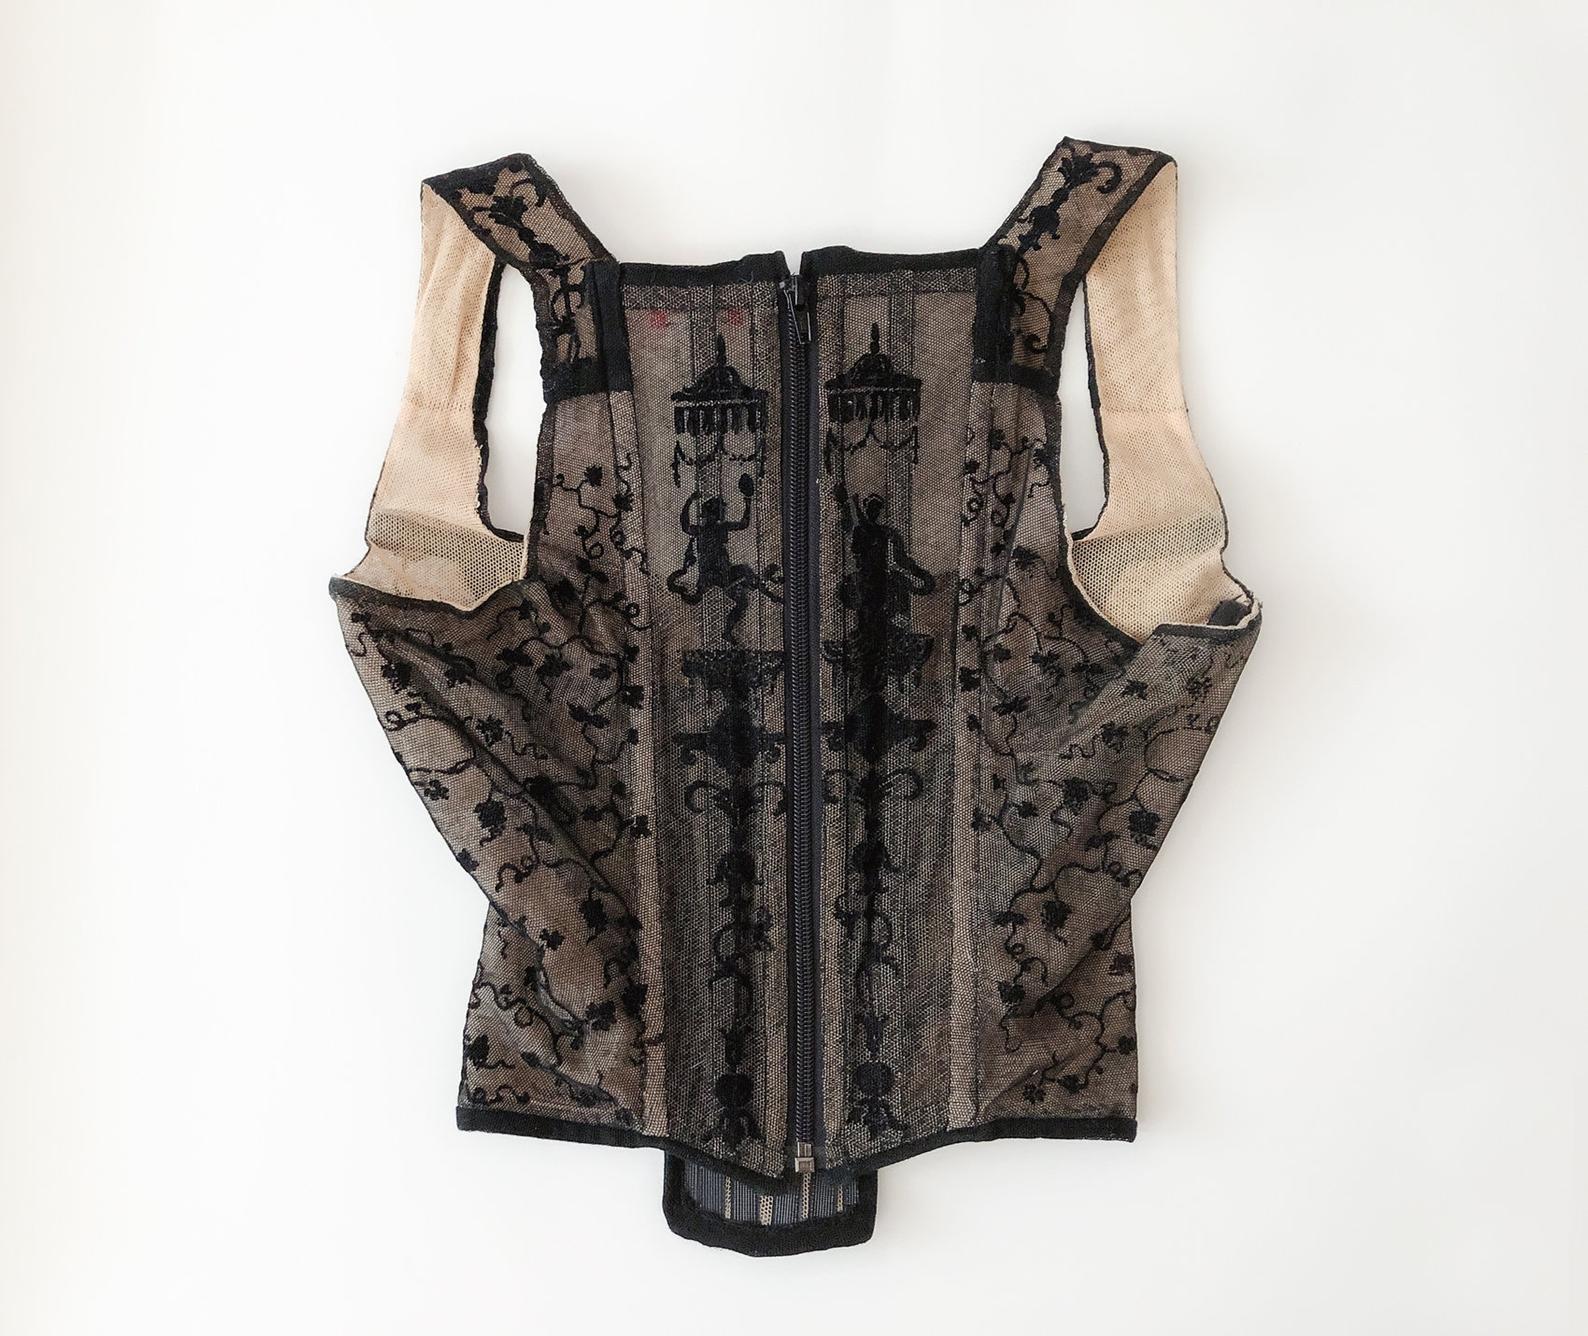 Vivienne Westwood Corset SS 1992 Runway Worn Rare Collectors black lace ICONIC For Sale 2